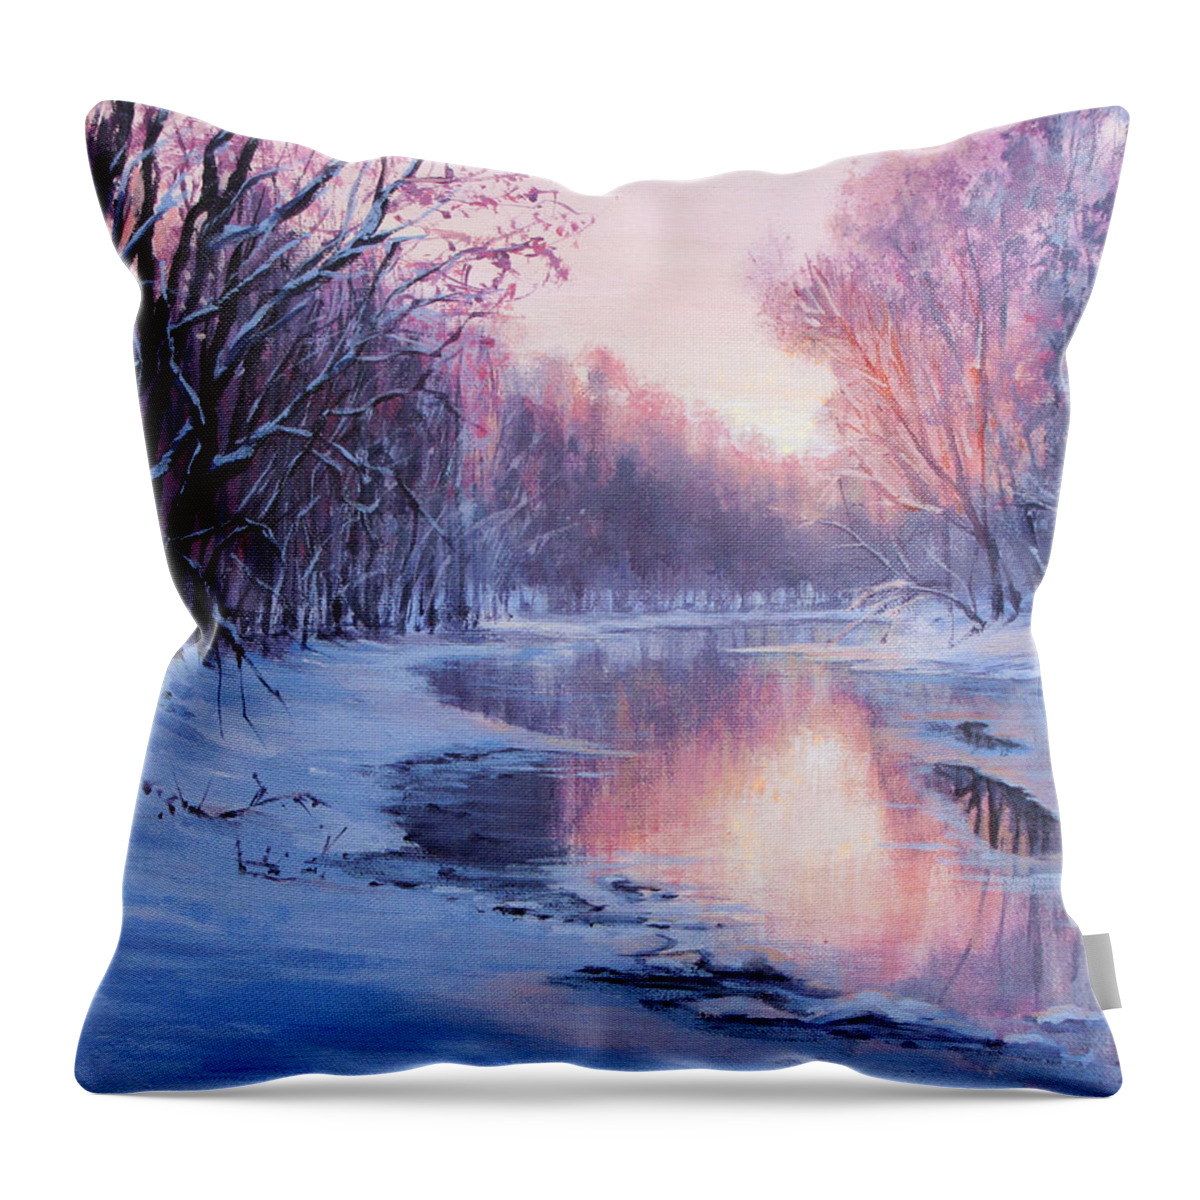 Landscape Throw Pillow featuring the painting First Light by Karen Ilari